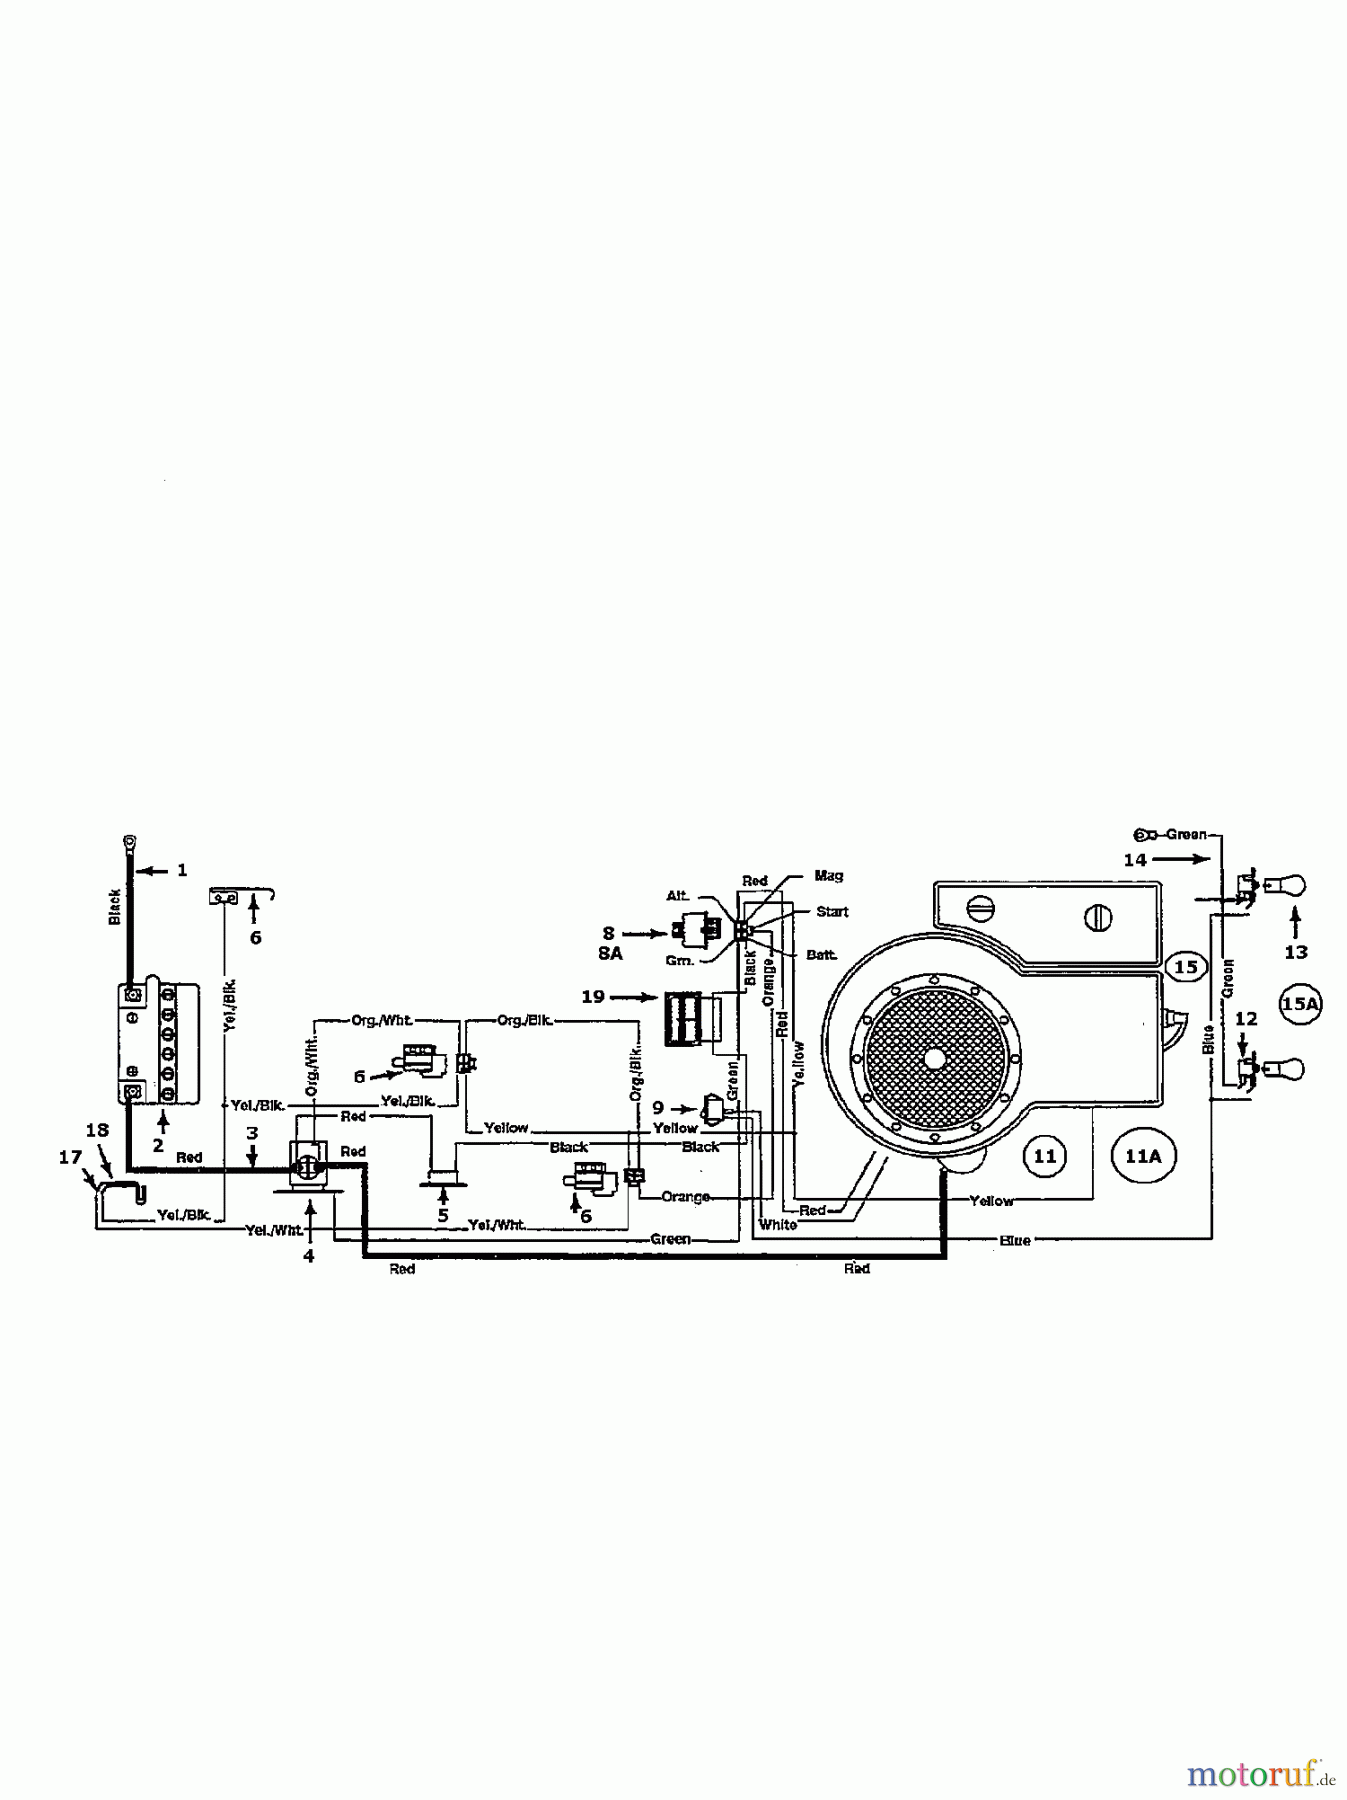  Columbia Lawn tractors 112/910 N 134I451E626  (1994) Wiring diagram single cylinder